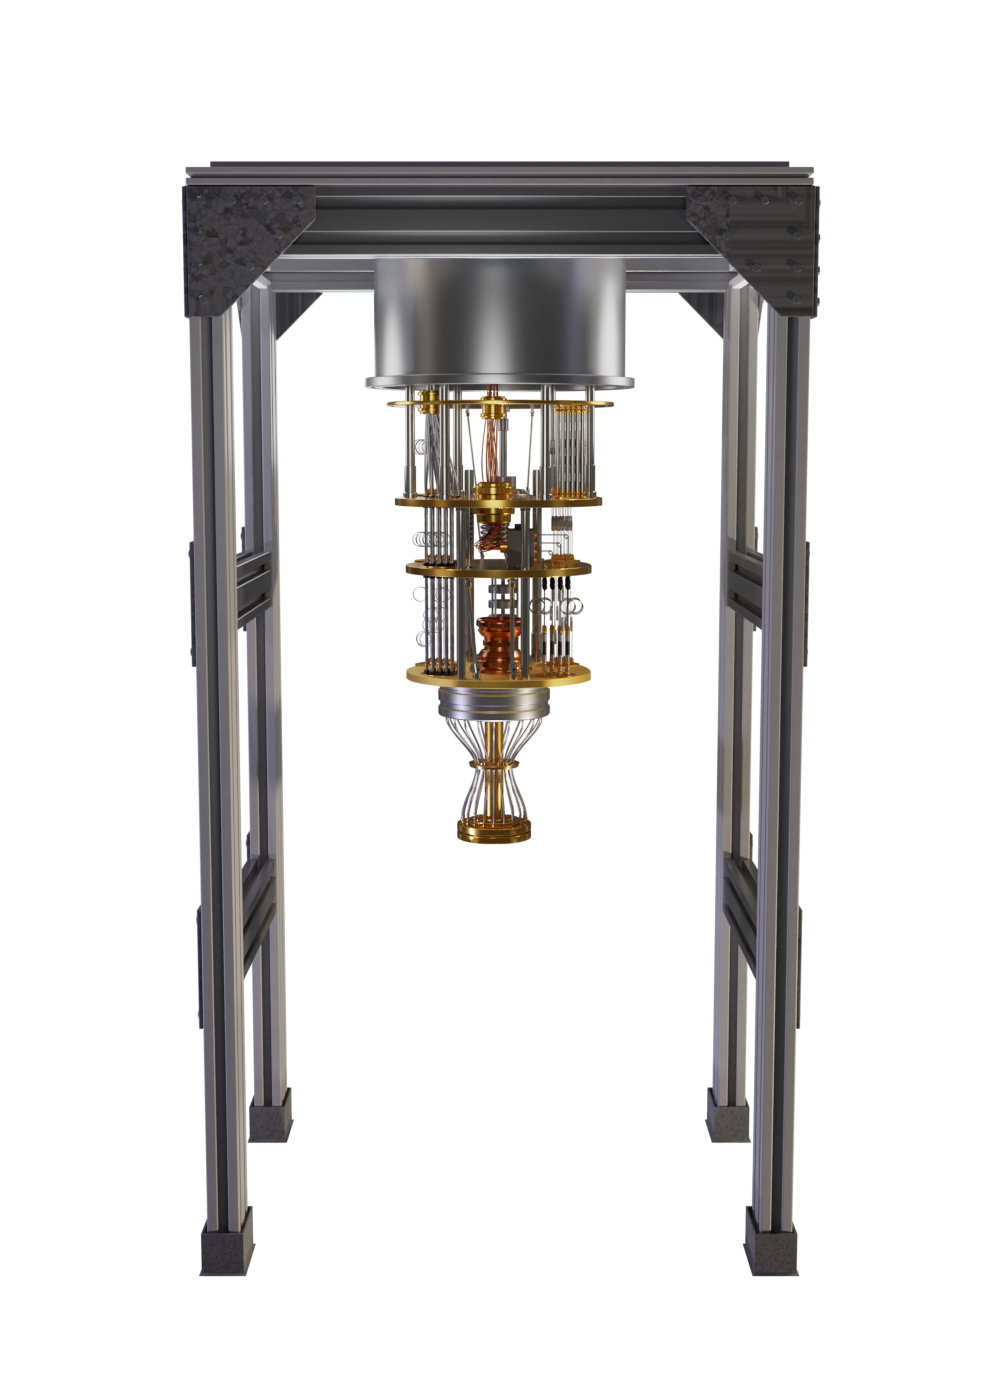 A rendered image of a quantum computer, which appears as a large, golden chandelier. The vast majority of the very large structure is dedicated to cooling the quantum processor. The chip itself is a very small spot on the bottom.